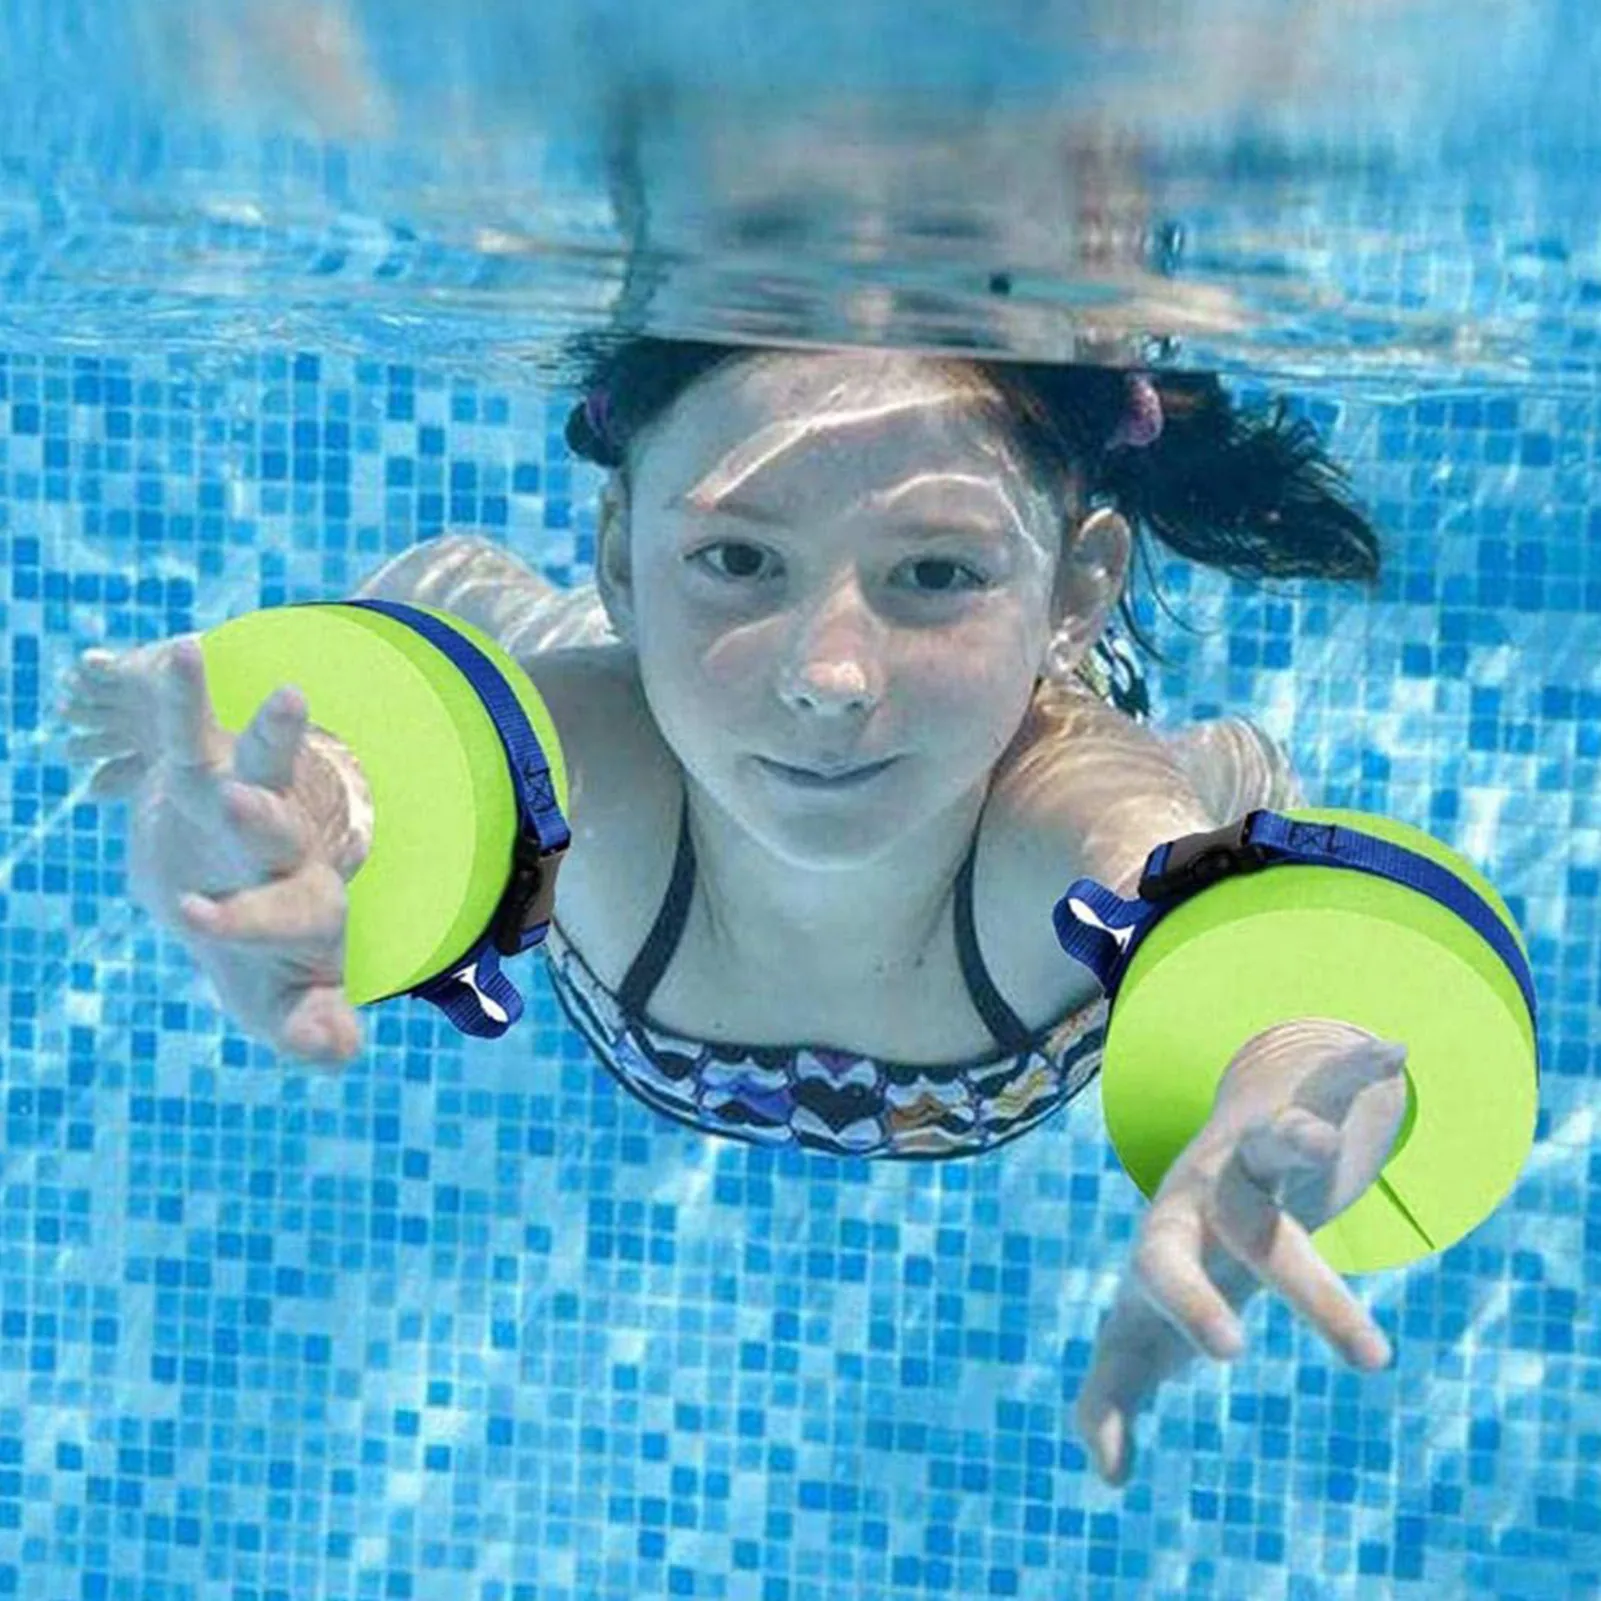 

Foam Swim Cuffs Water Aerobics Equipment Float Ring Fitness Exercise Set Workout Ankles Arms Belts With Quick Release Buckle